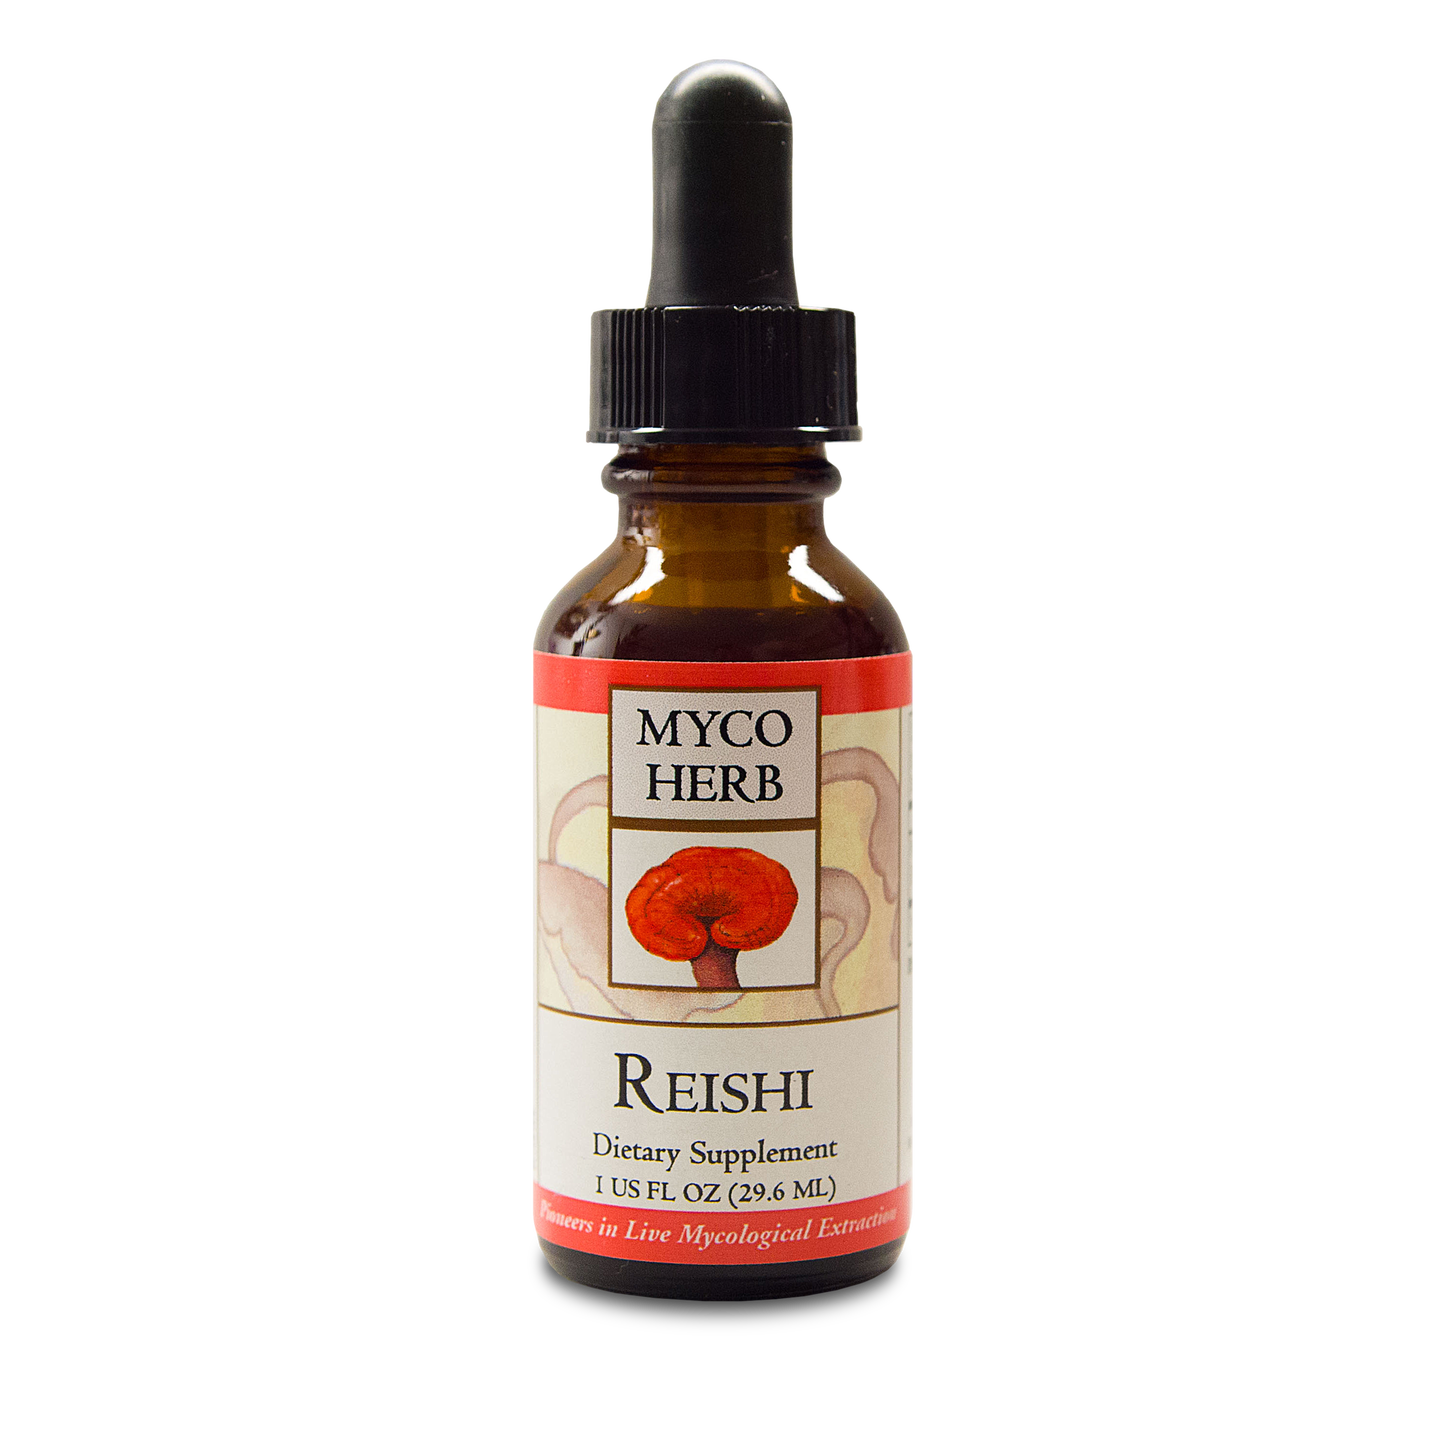 Reishi mushroom has been used to help enhance the immune system, reduce stress, improve sleep, and lessen fatigue.